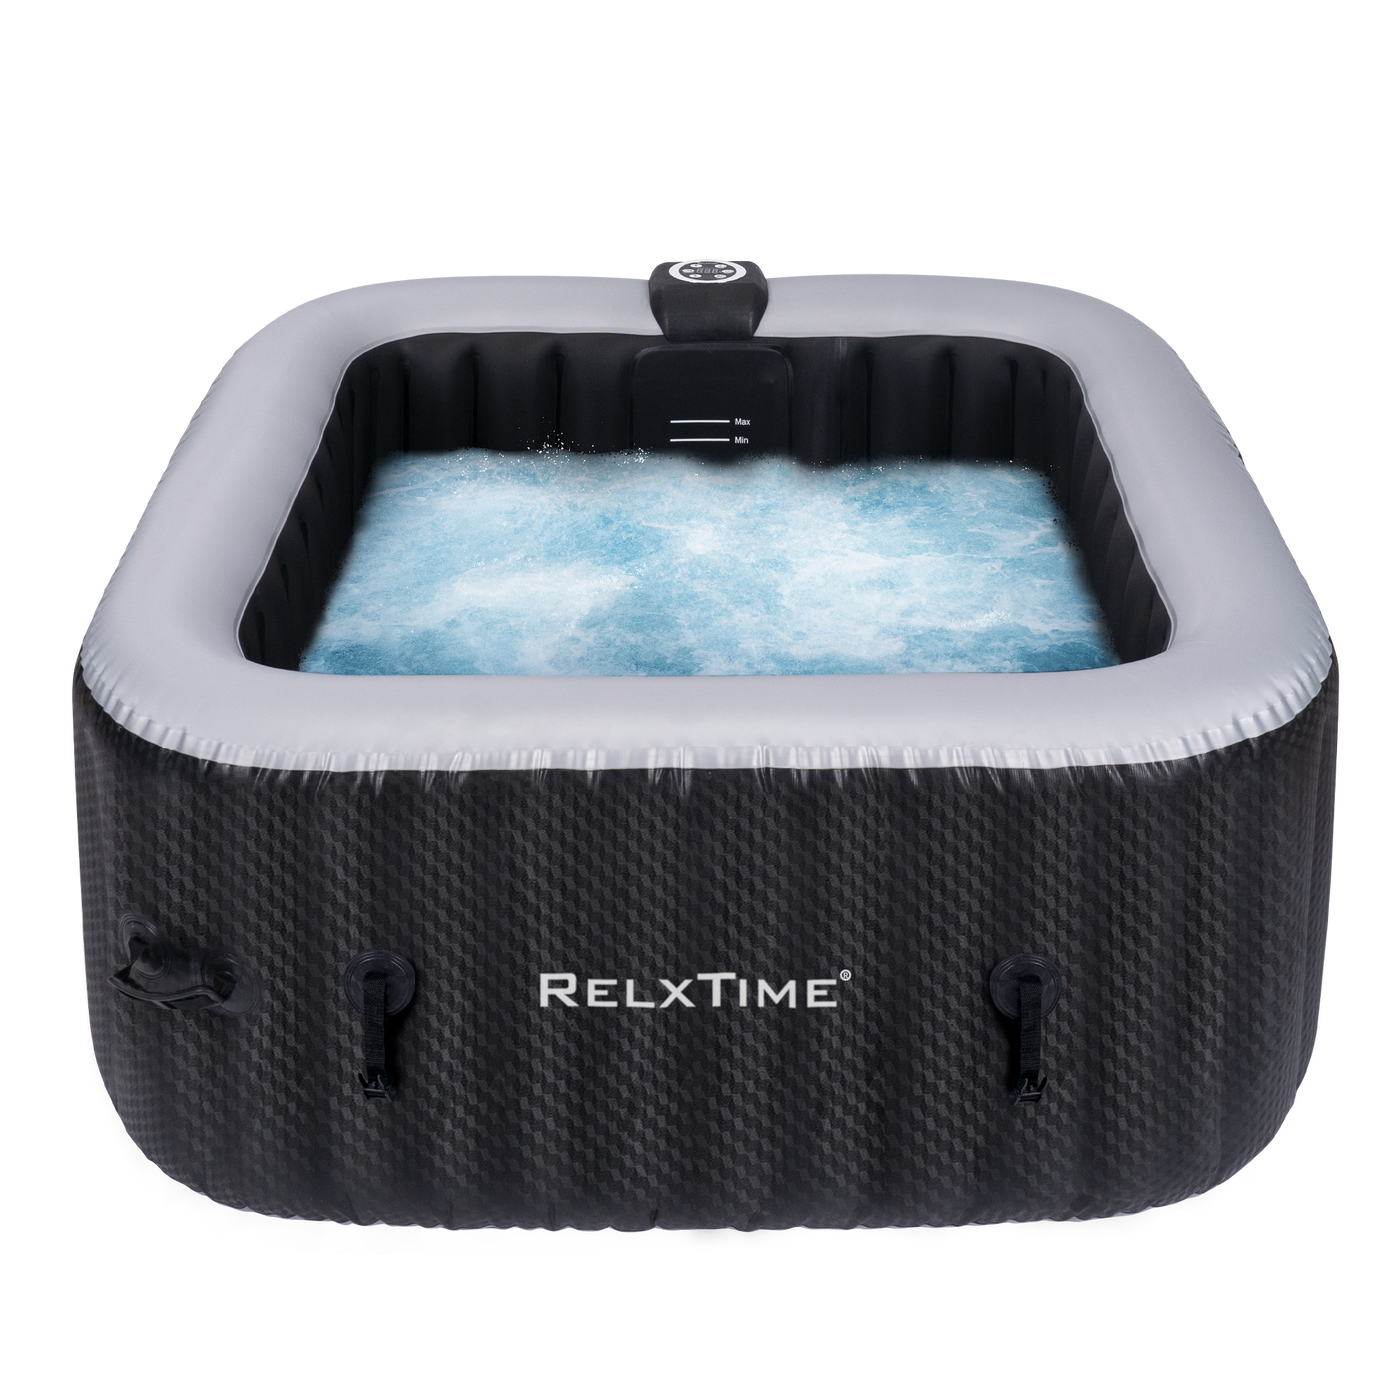 Relxtime 2-3 Person Square Inflatable Hot Tub | Best Inflatable Hot Tub